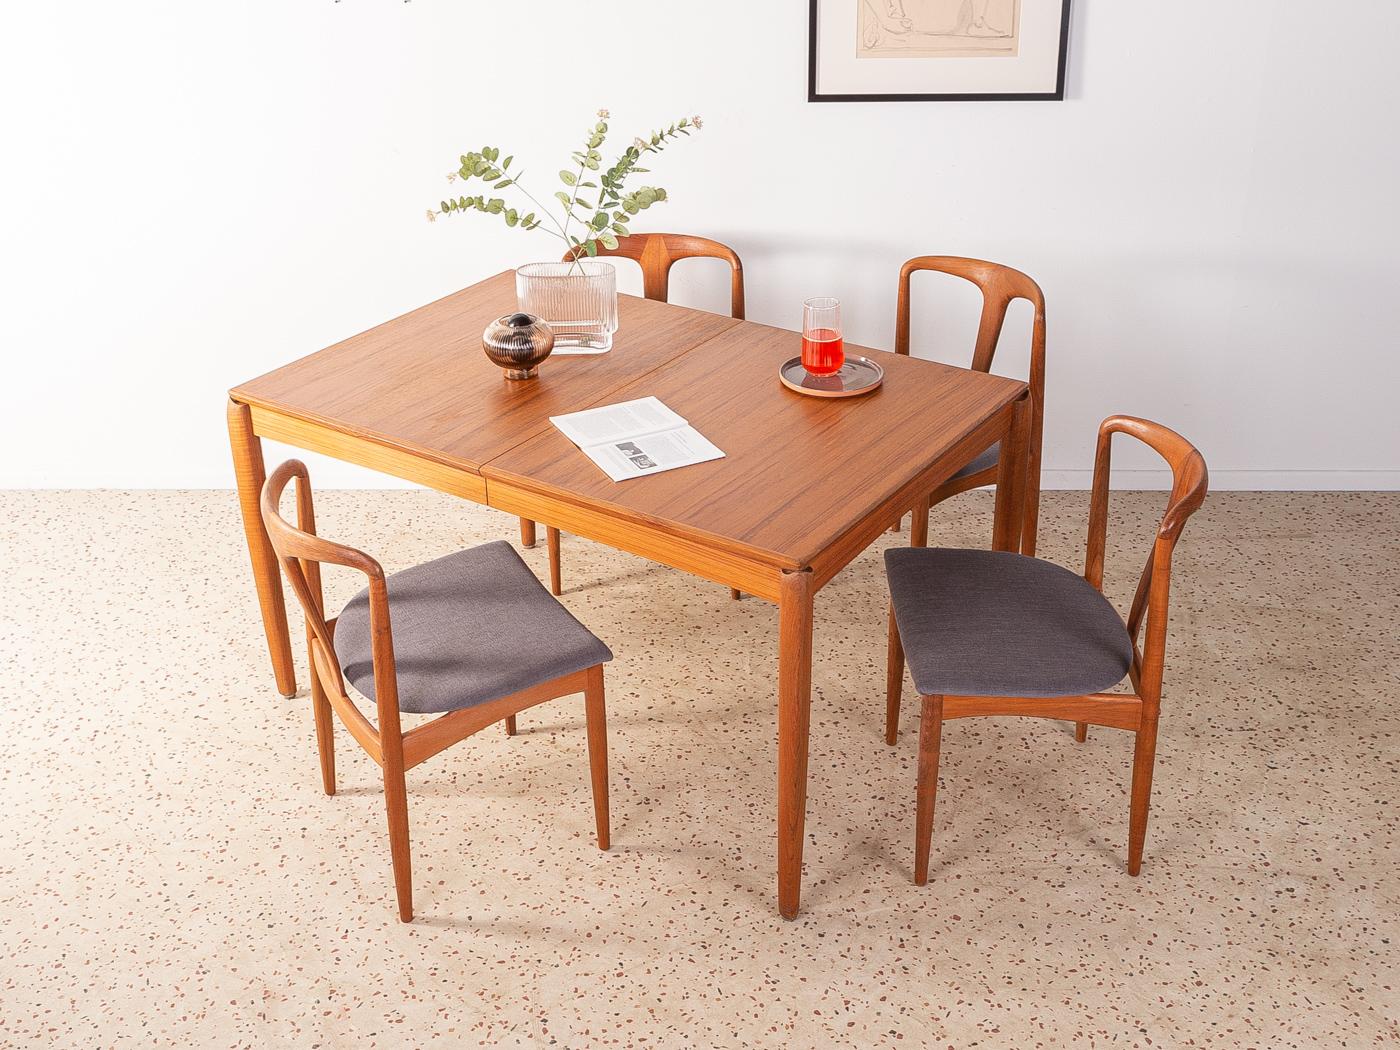 Rare extendable teak dining table from the 1960s by H.W. Klein for Bramin. Solid frame and veneered table top with solid wood edge. The extension leaf can be stowed under the table top.
Table bottom edge 66 cm
Width (extended) 196 cm 

Quality